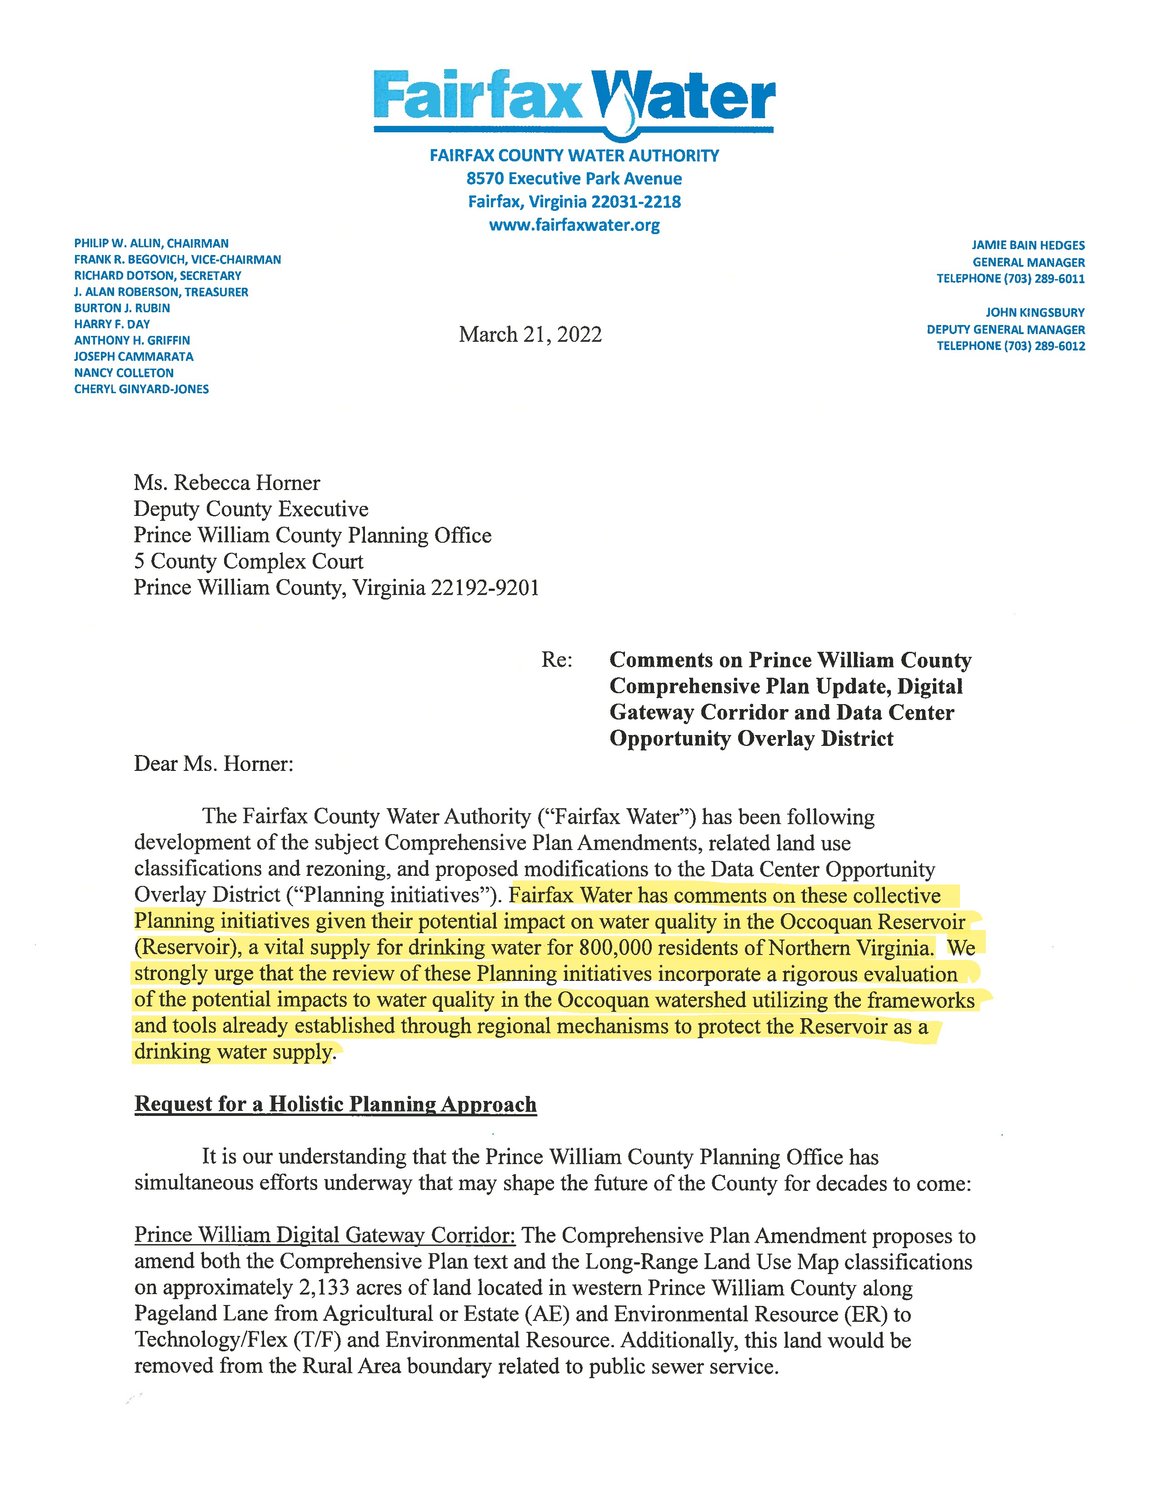 Letter from Fairfax Water Authority to Prince William County Deputy County Executive